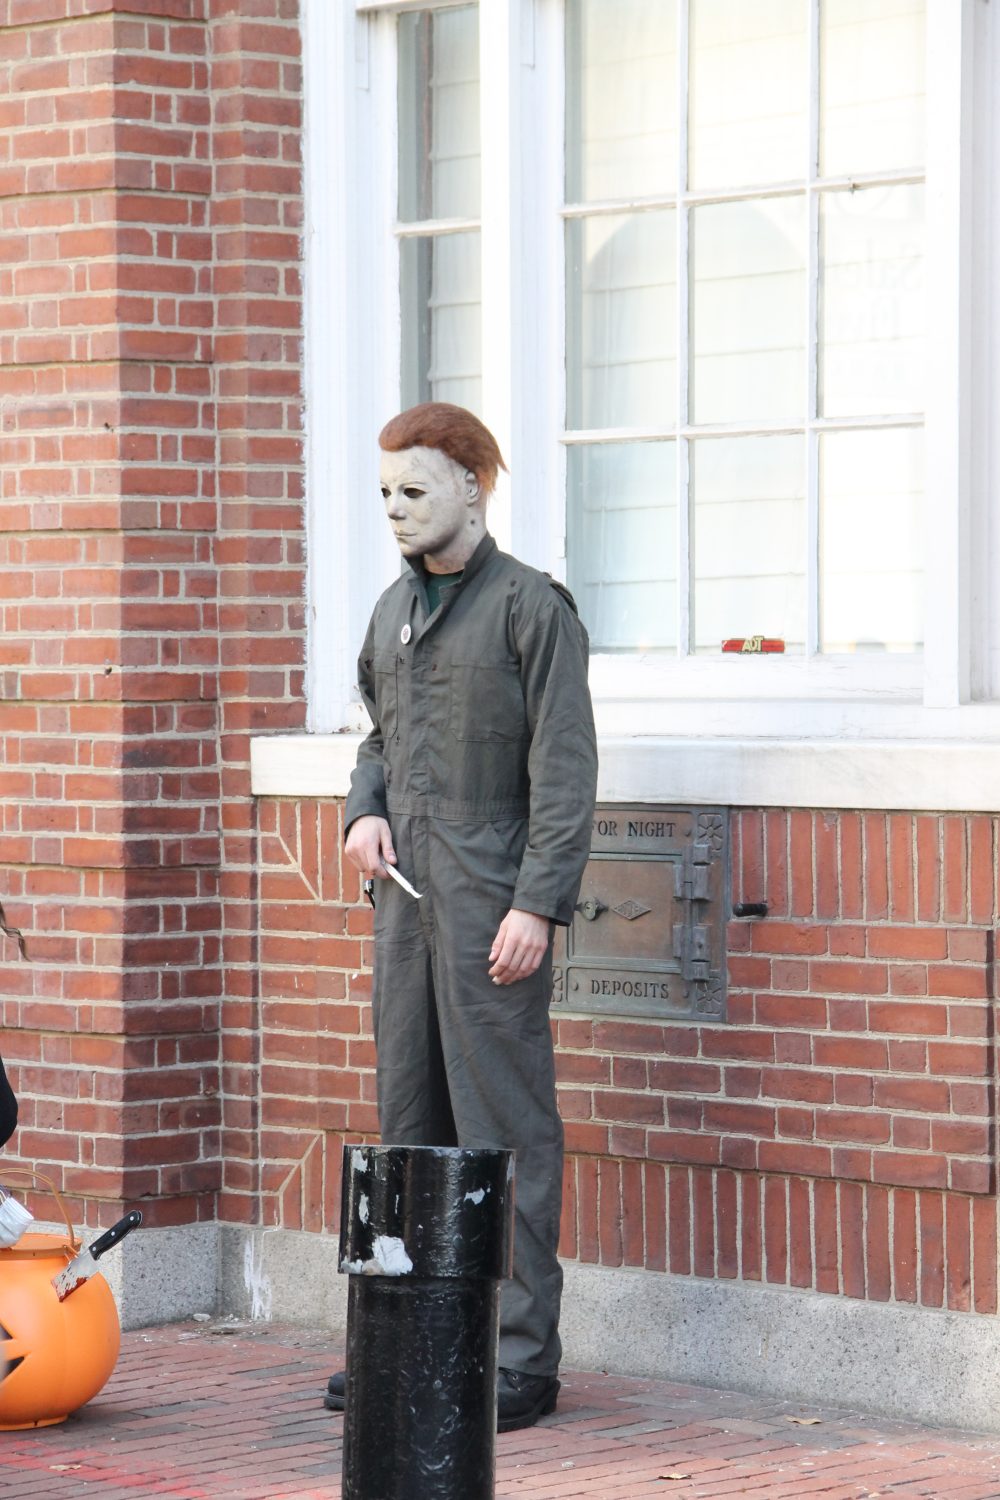 People dress up in Salem like all kinds of characters.  This person was dressed as Michael Meyers